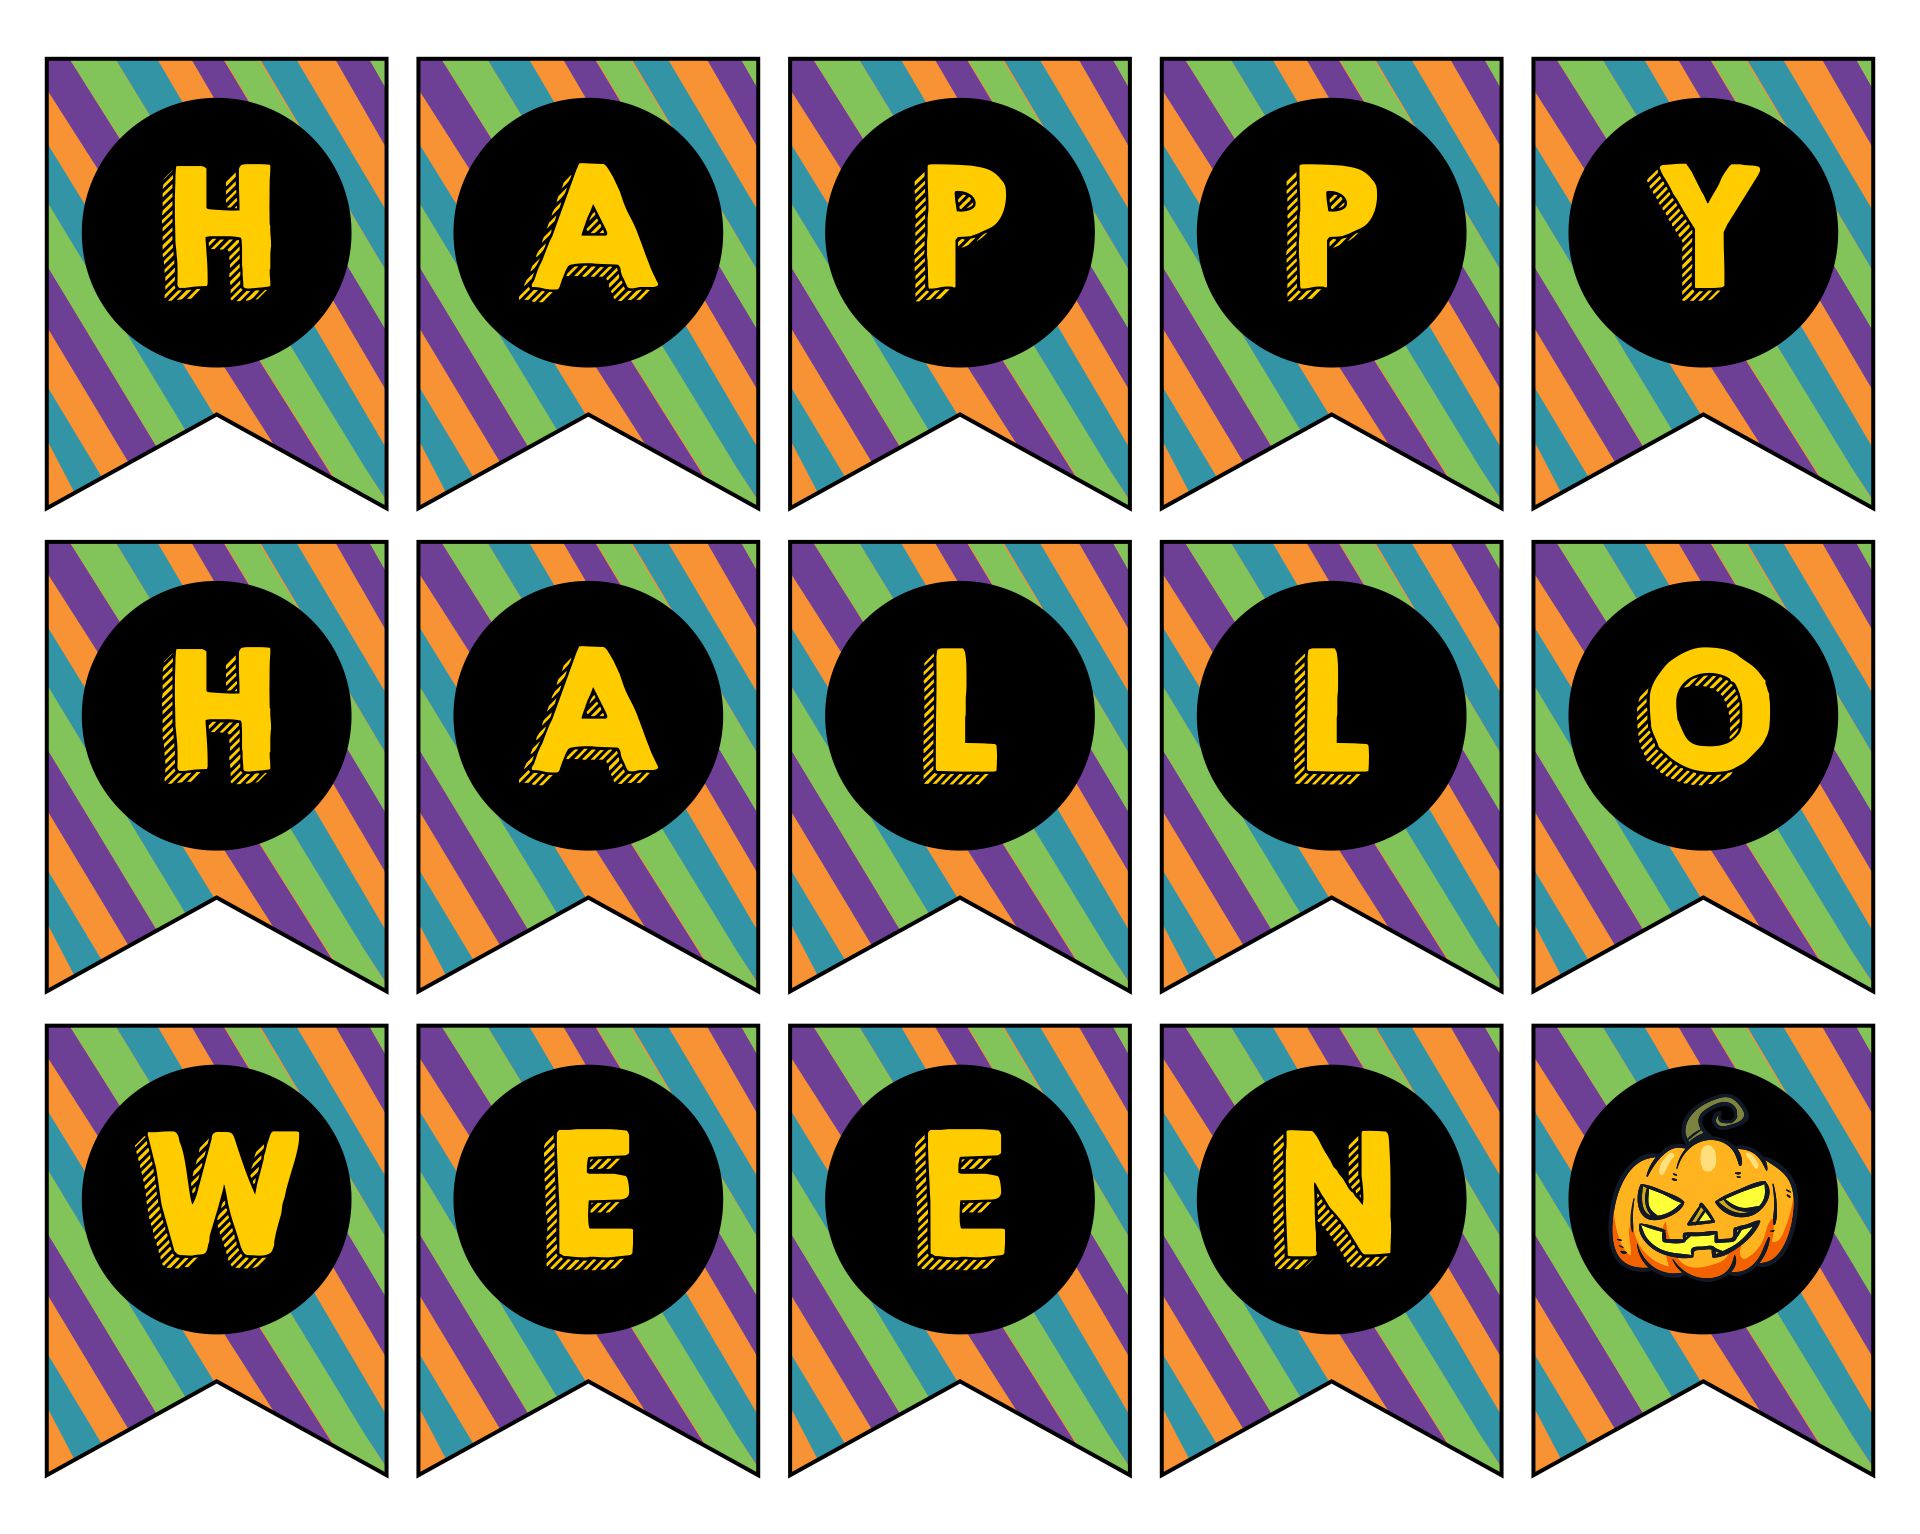 Printable Halloween Party Banners